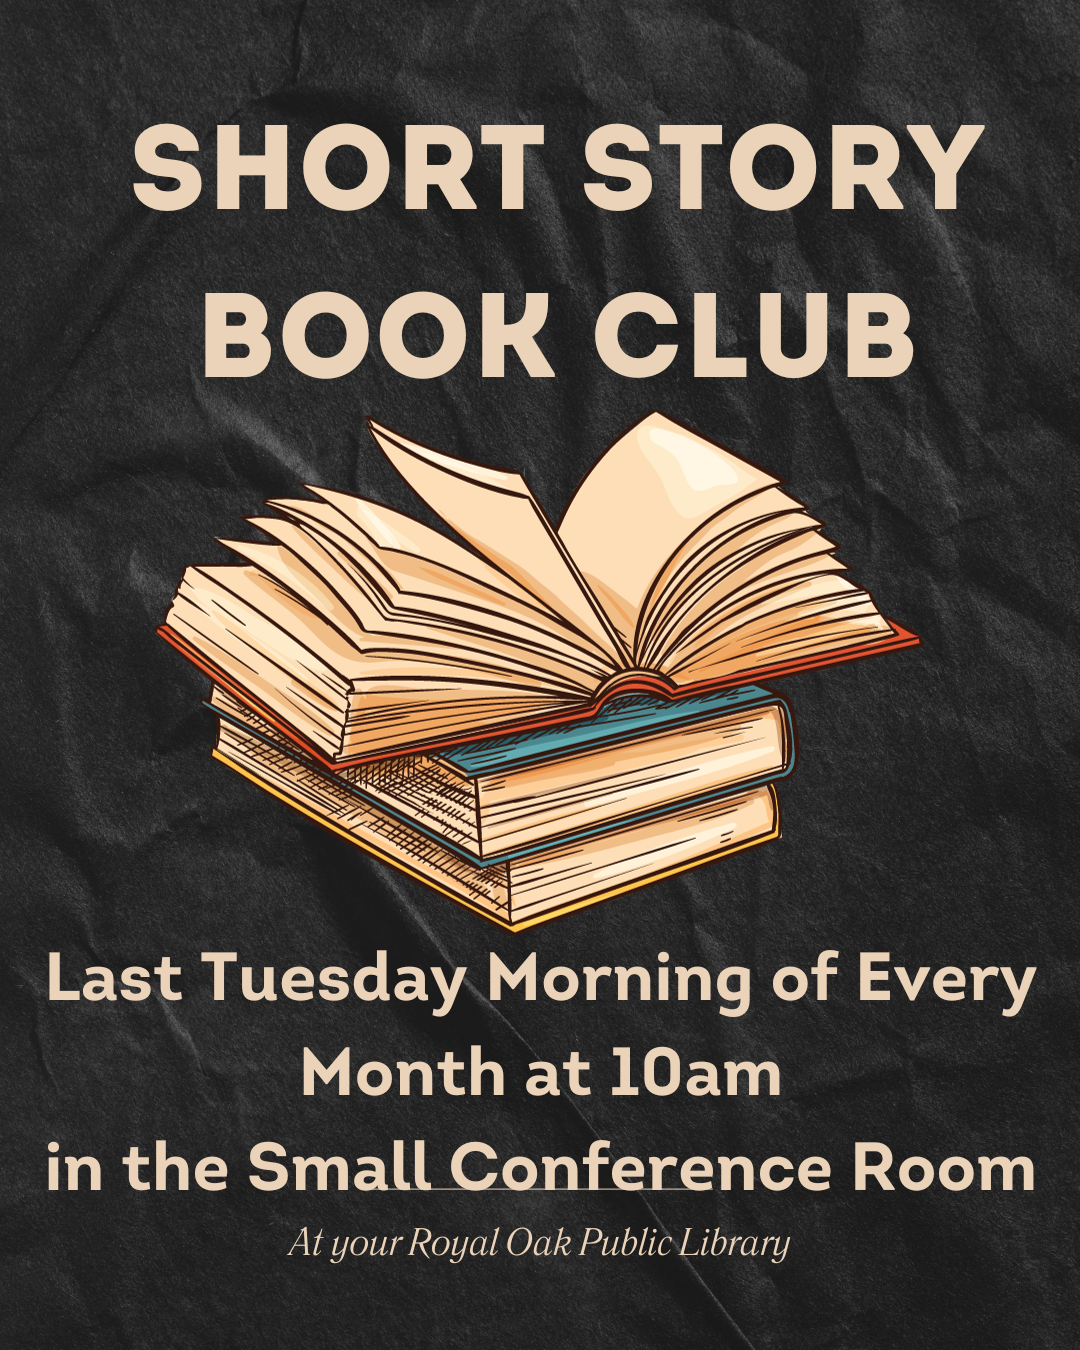 Open book with text stating the program is on the last Tuesday of every month at 10am in the small conference room.